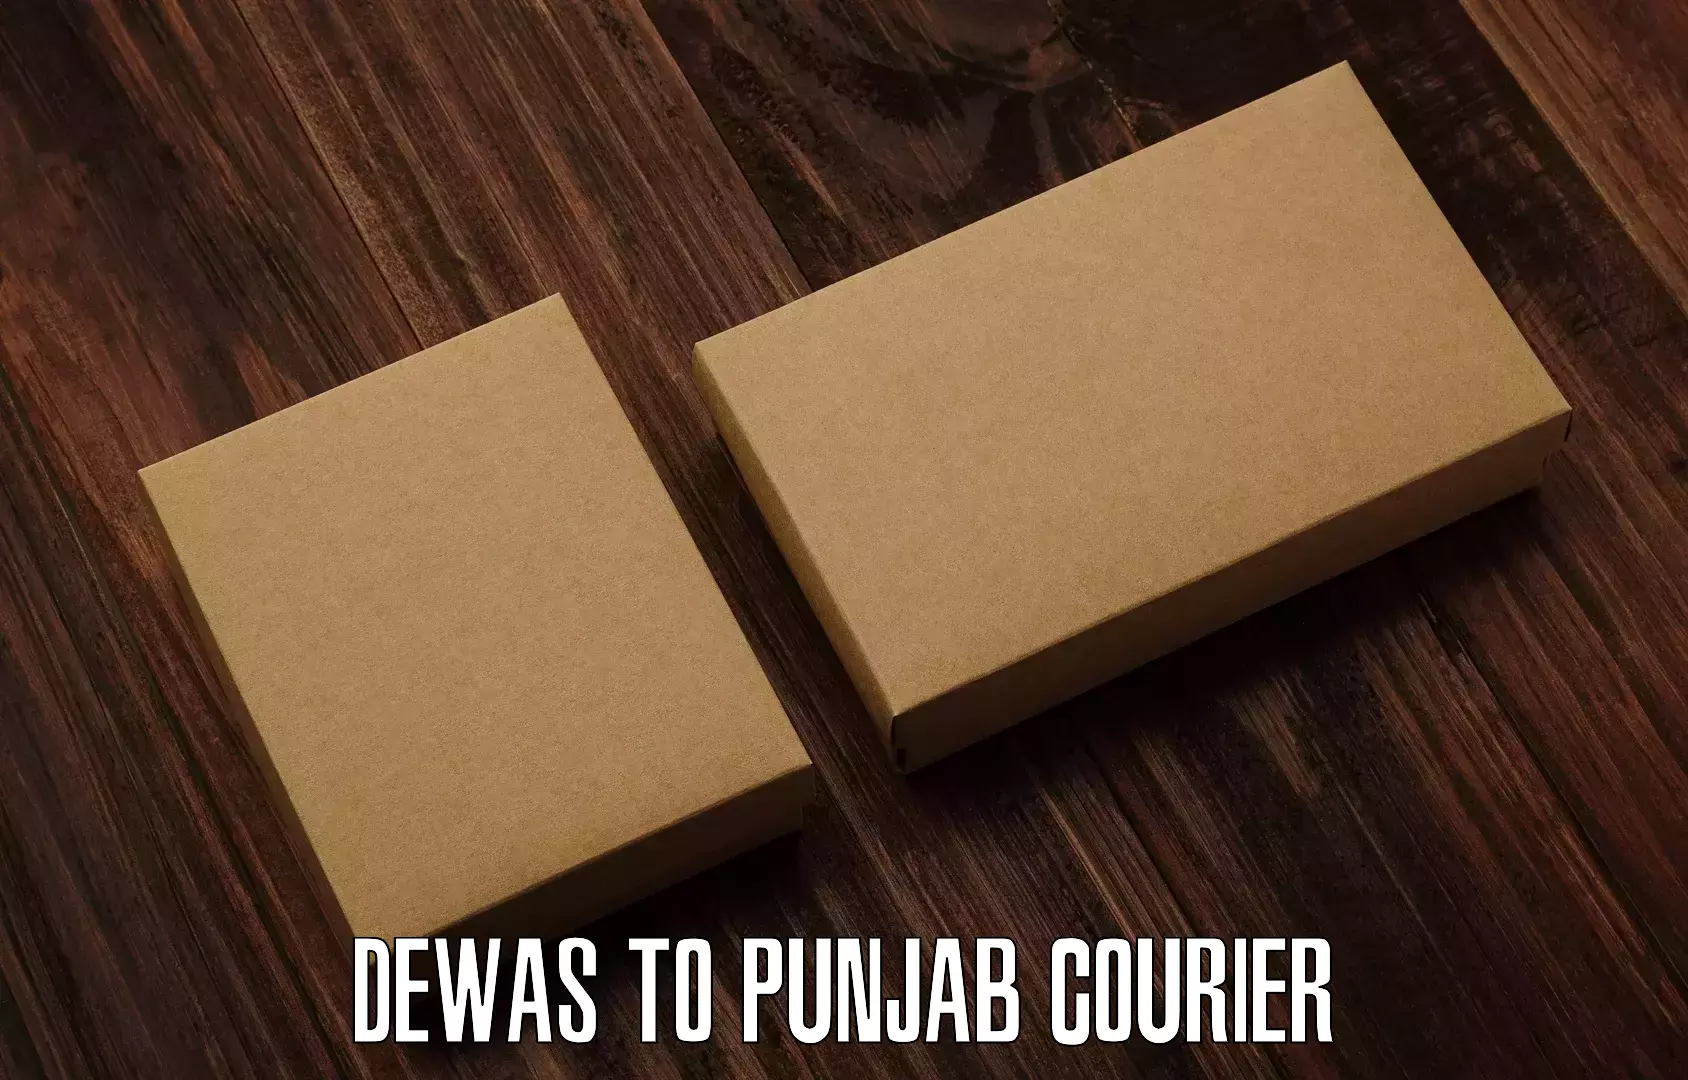 Expedited shipping methods Dewas to Batala